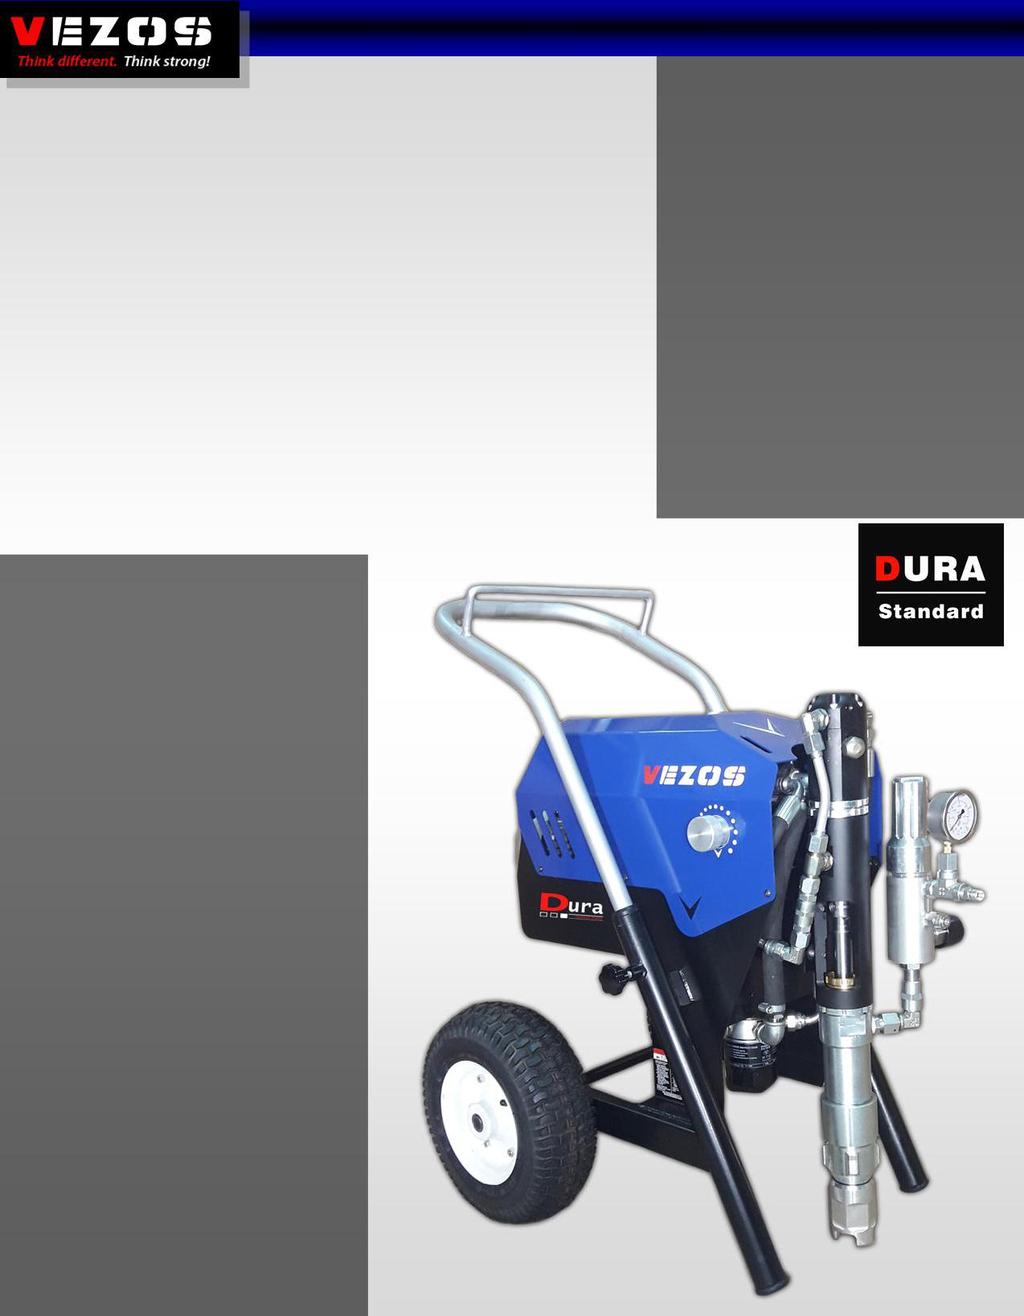 Applications DURA-8 standard edition, is equipped with a powerful 4 hp electric motor with a spraying ability that can cover all types of everyday materials.